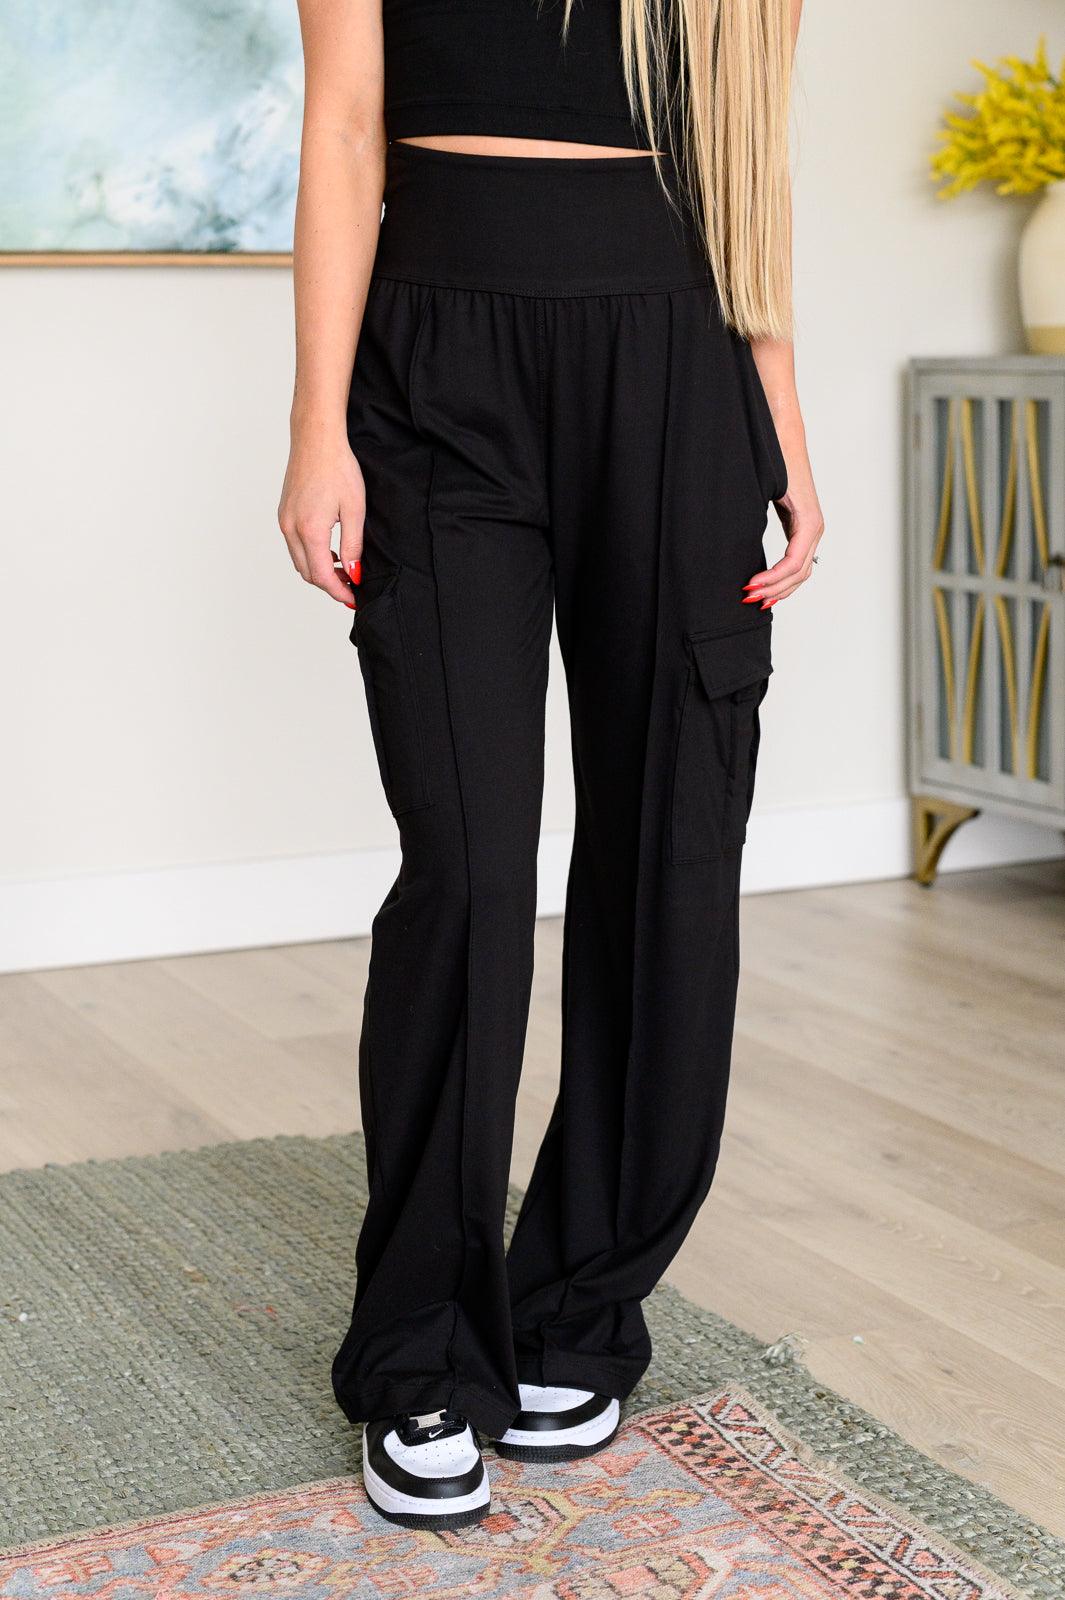 Race to Relax Cargo Pants in Black Black Athleisure Pants